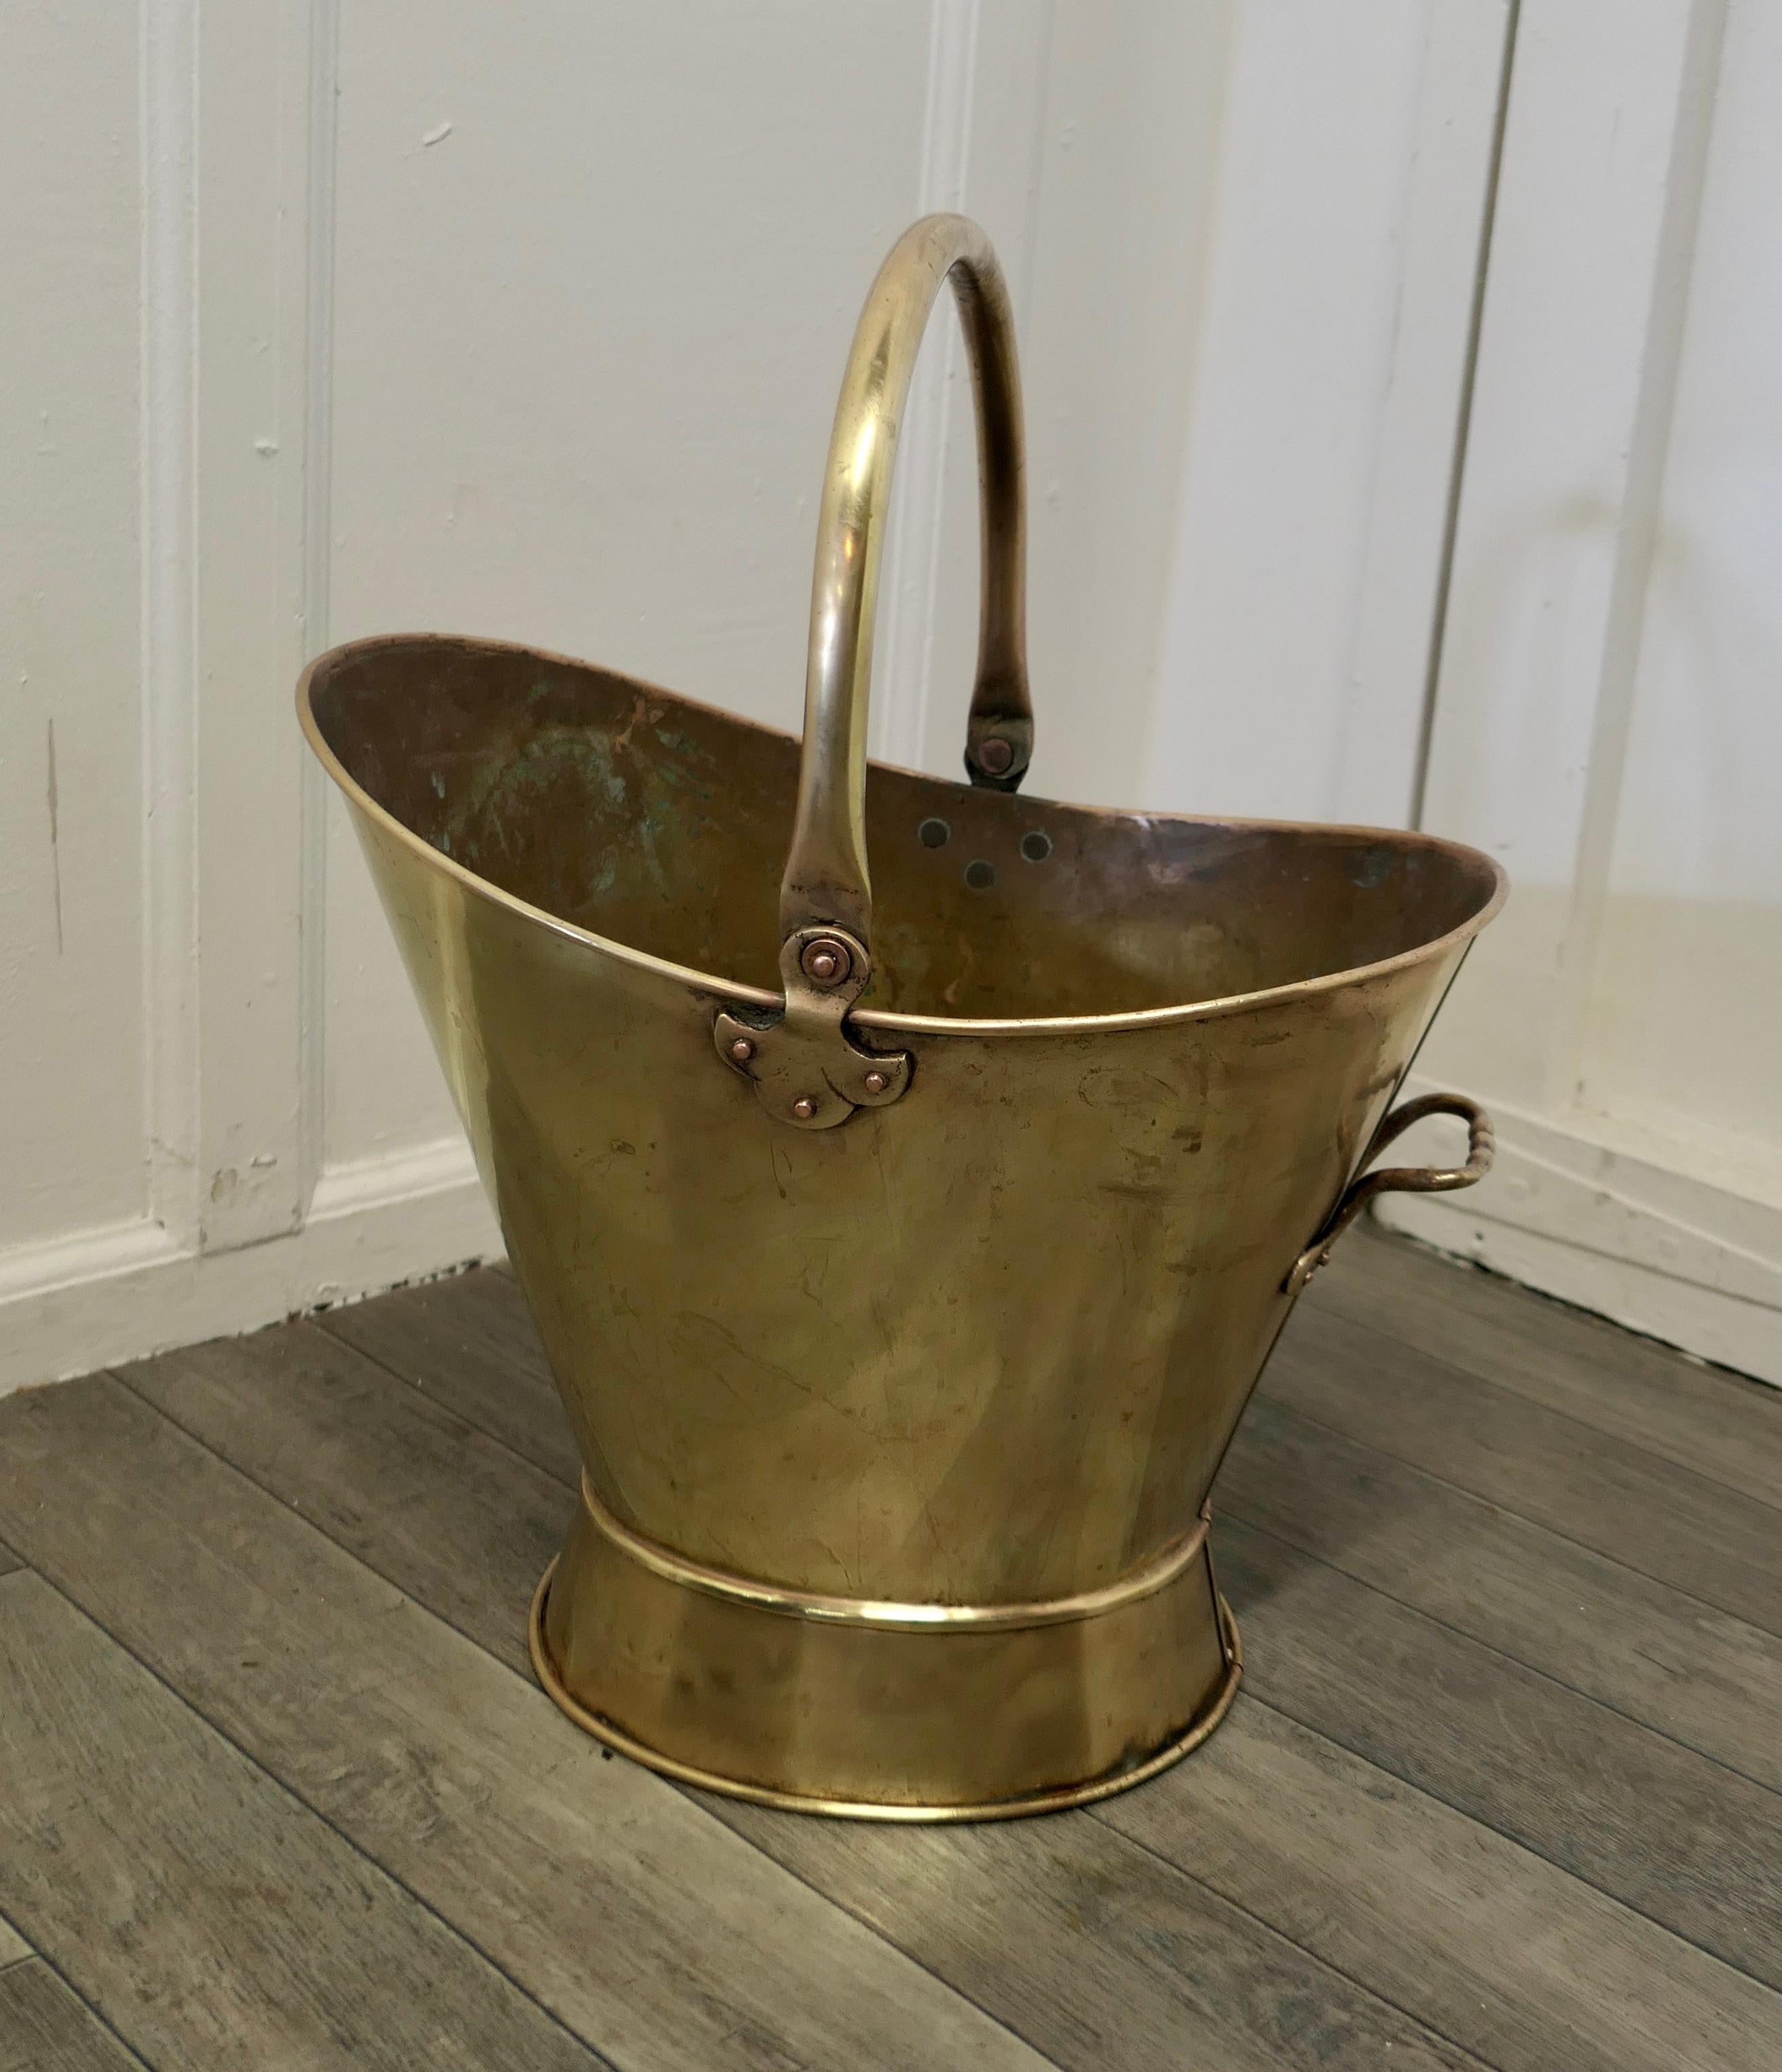 A large Art Nouveau brass helmet coal scuttle.

This is a very attractive bucket is has an open oval shape with an upward sweeping side and an extra handle at the other, it has a swing handle on top 
The scuttle is in very good used condition,